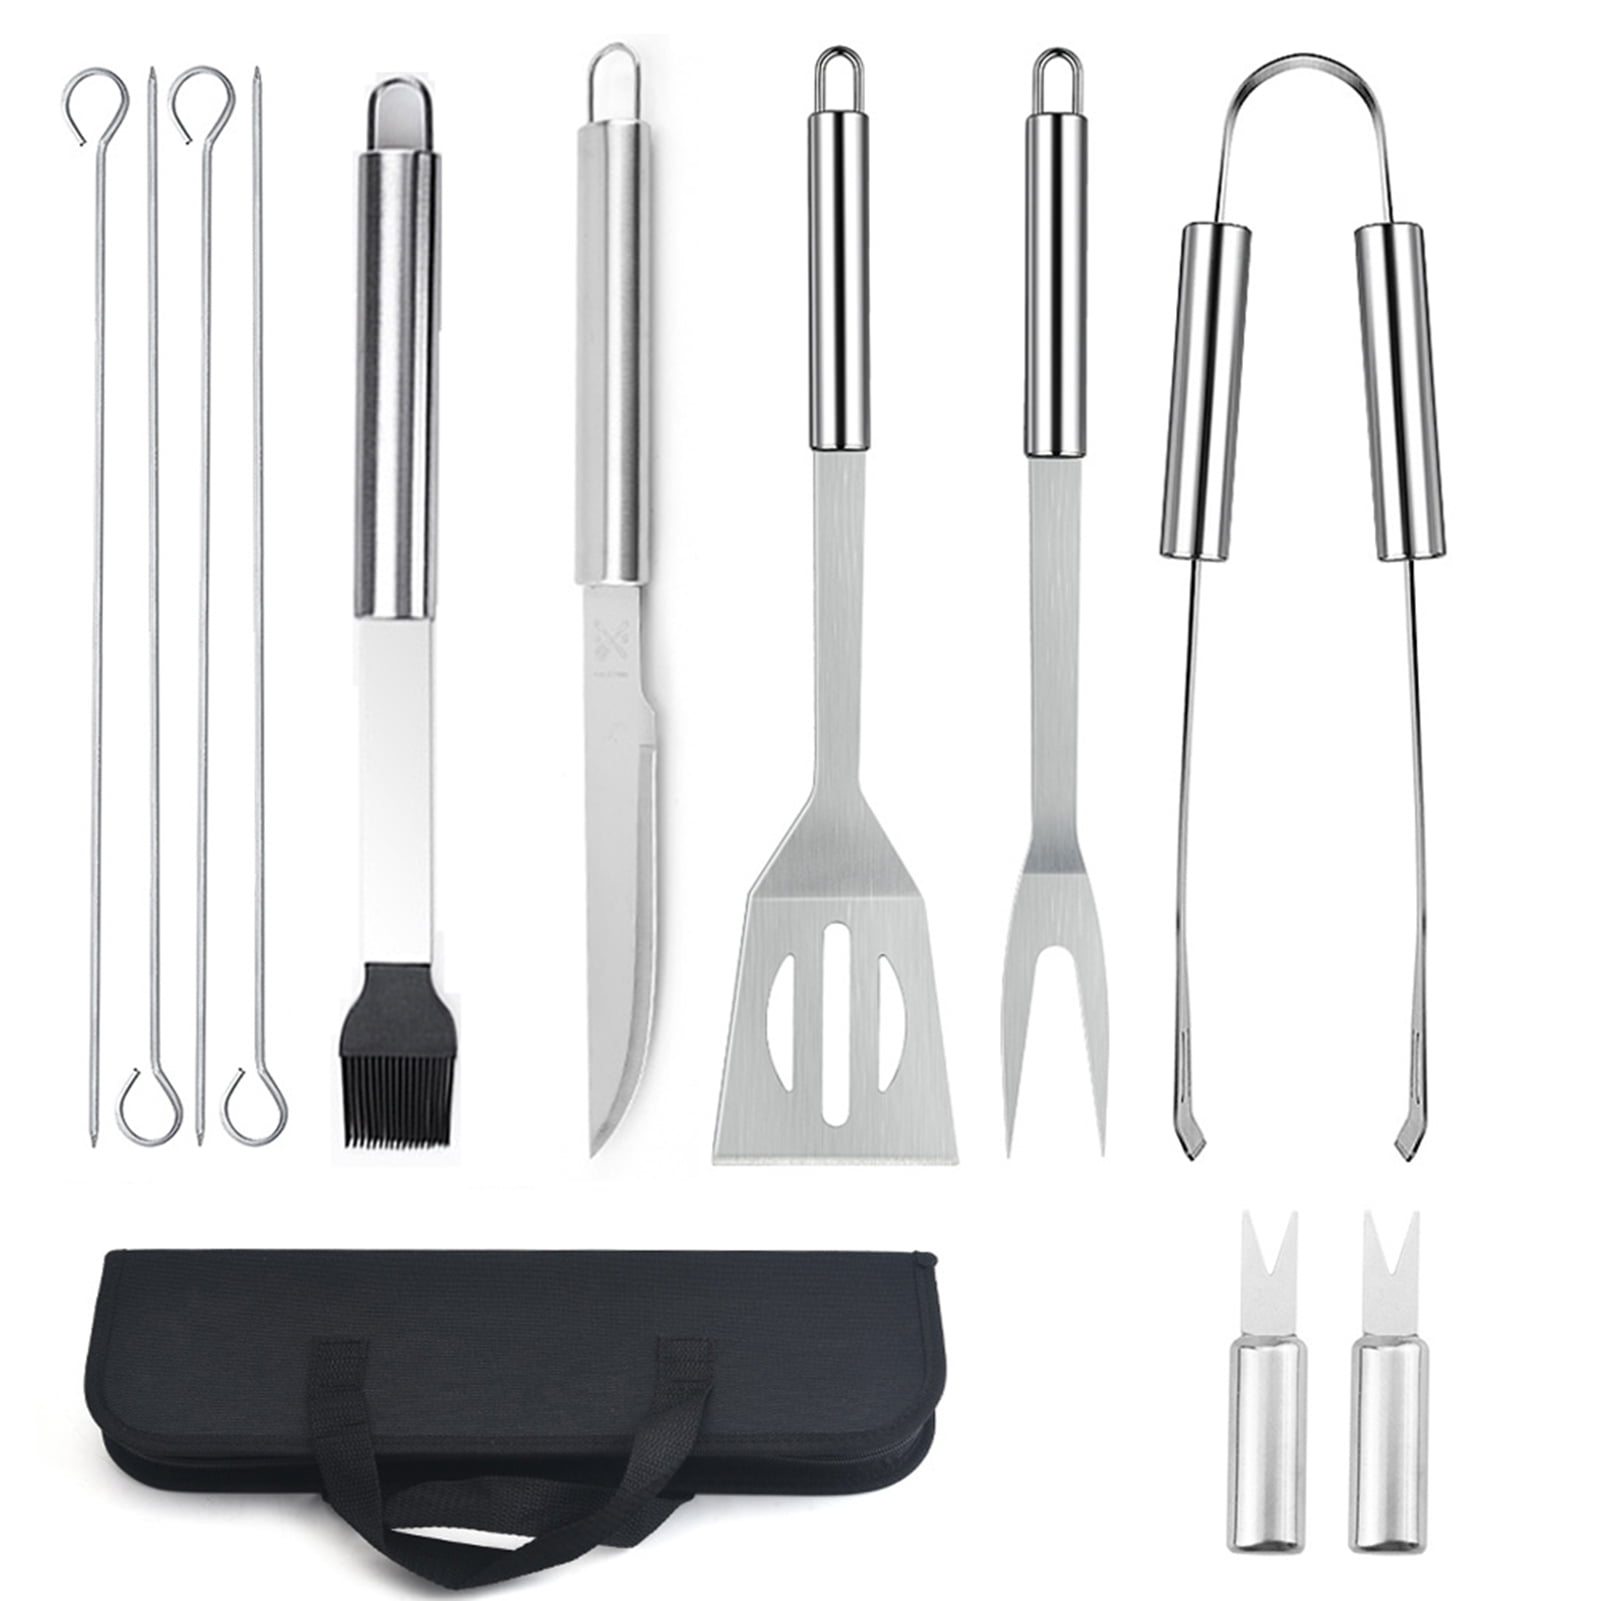 12 PCS BBQ Accessories Grill Tools Set Utensils Stainless Steel Kit Cooler Bag 